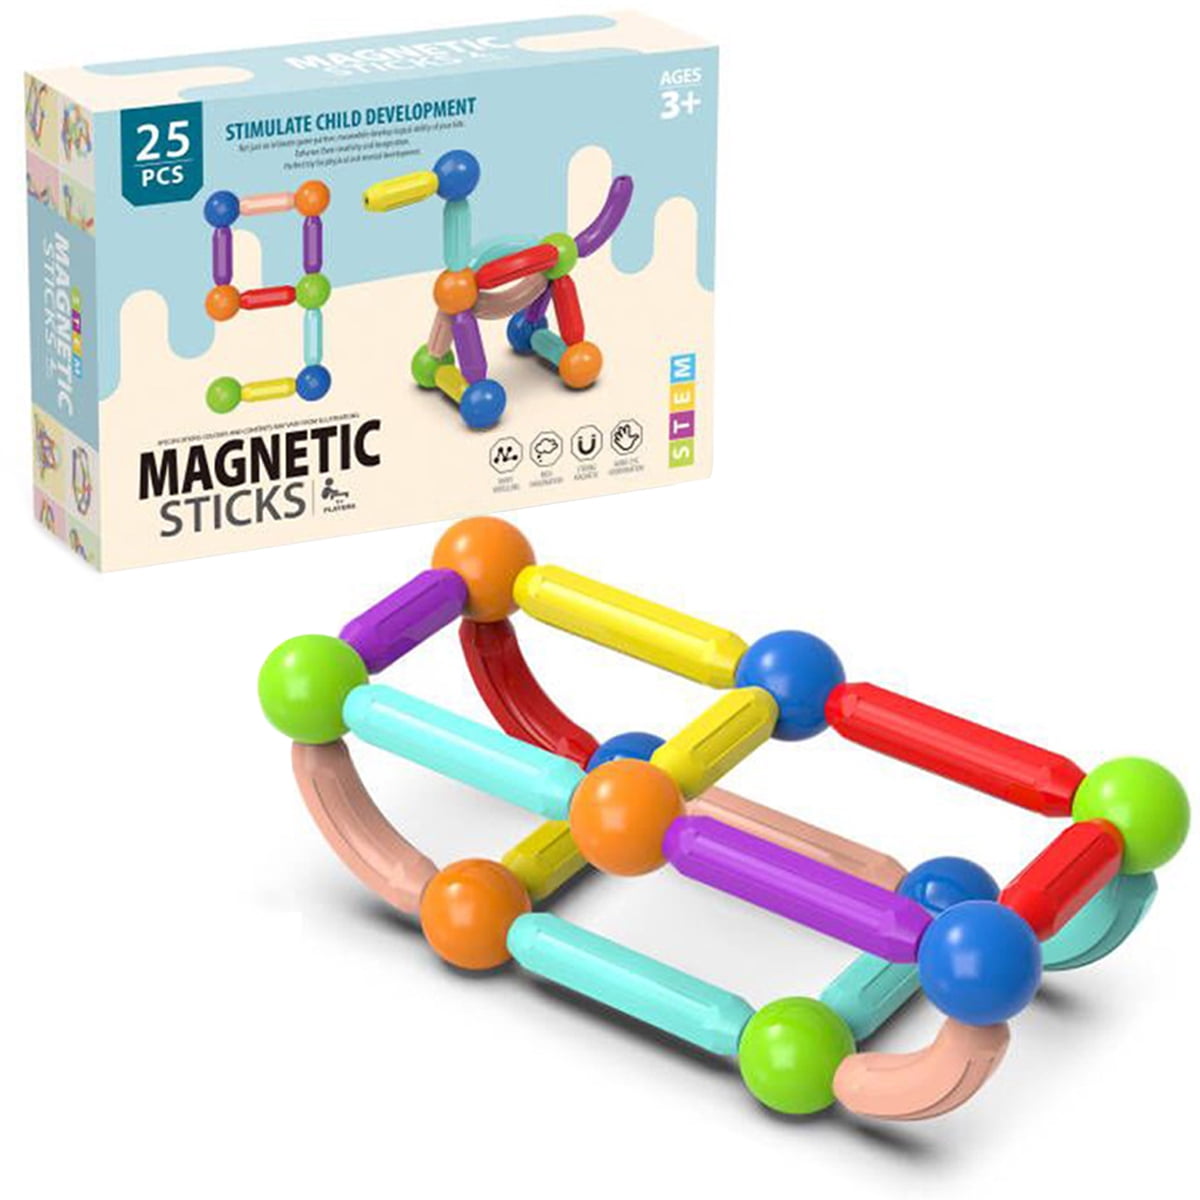 Magnetic Building Blocks Construction Puzzle Kids Toy Educational Game Sticks 